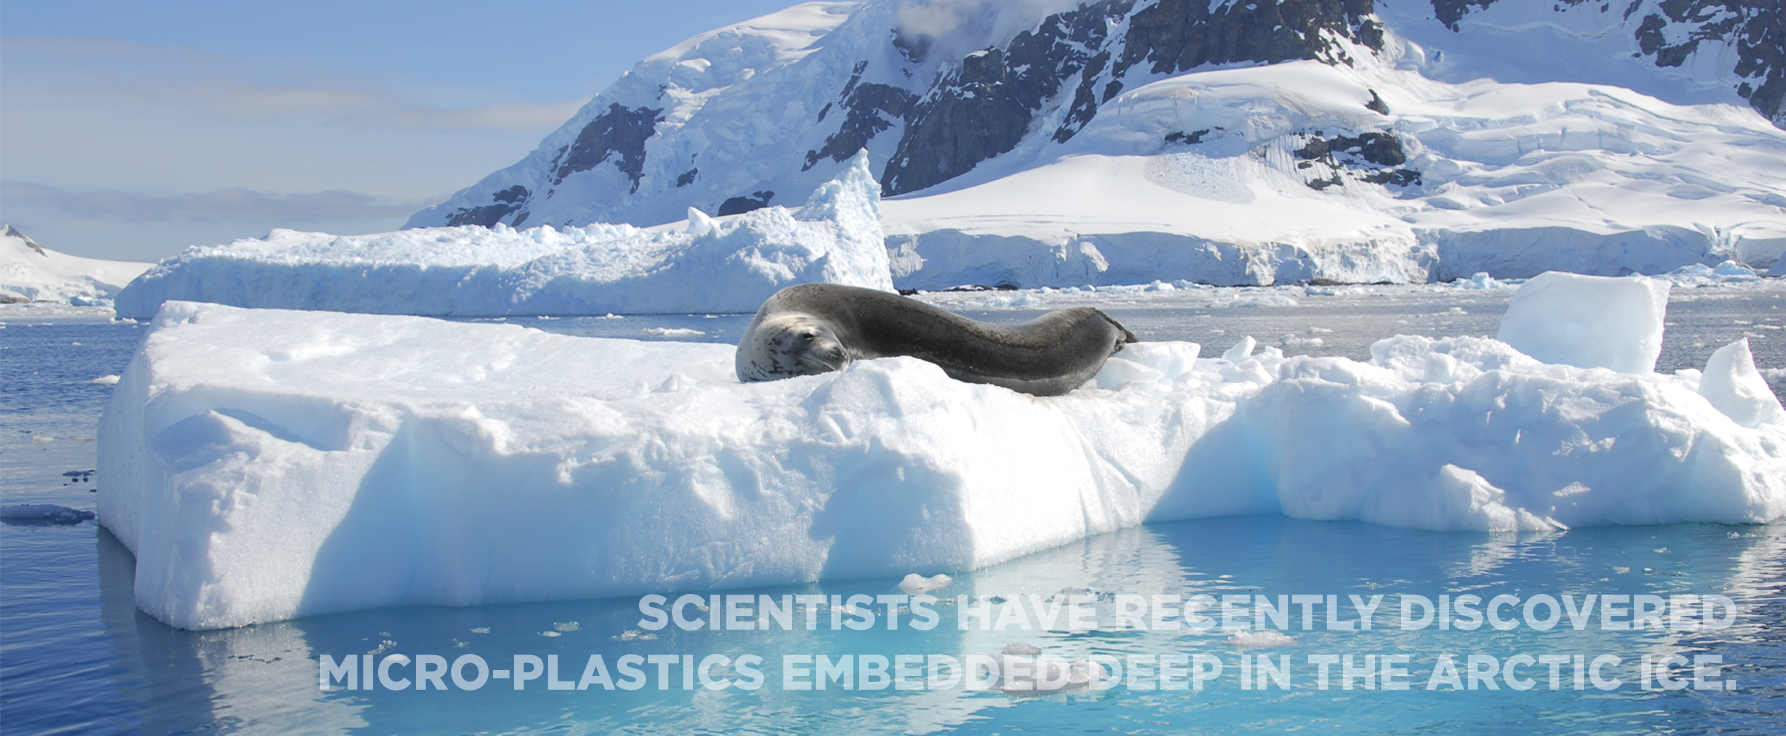 SCIENTISTS HAVE RECENTLY DISCOVERED MICRO-PLASTICS EMBEDDED DEEP IN THE ARCTIC ICE.